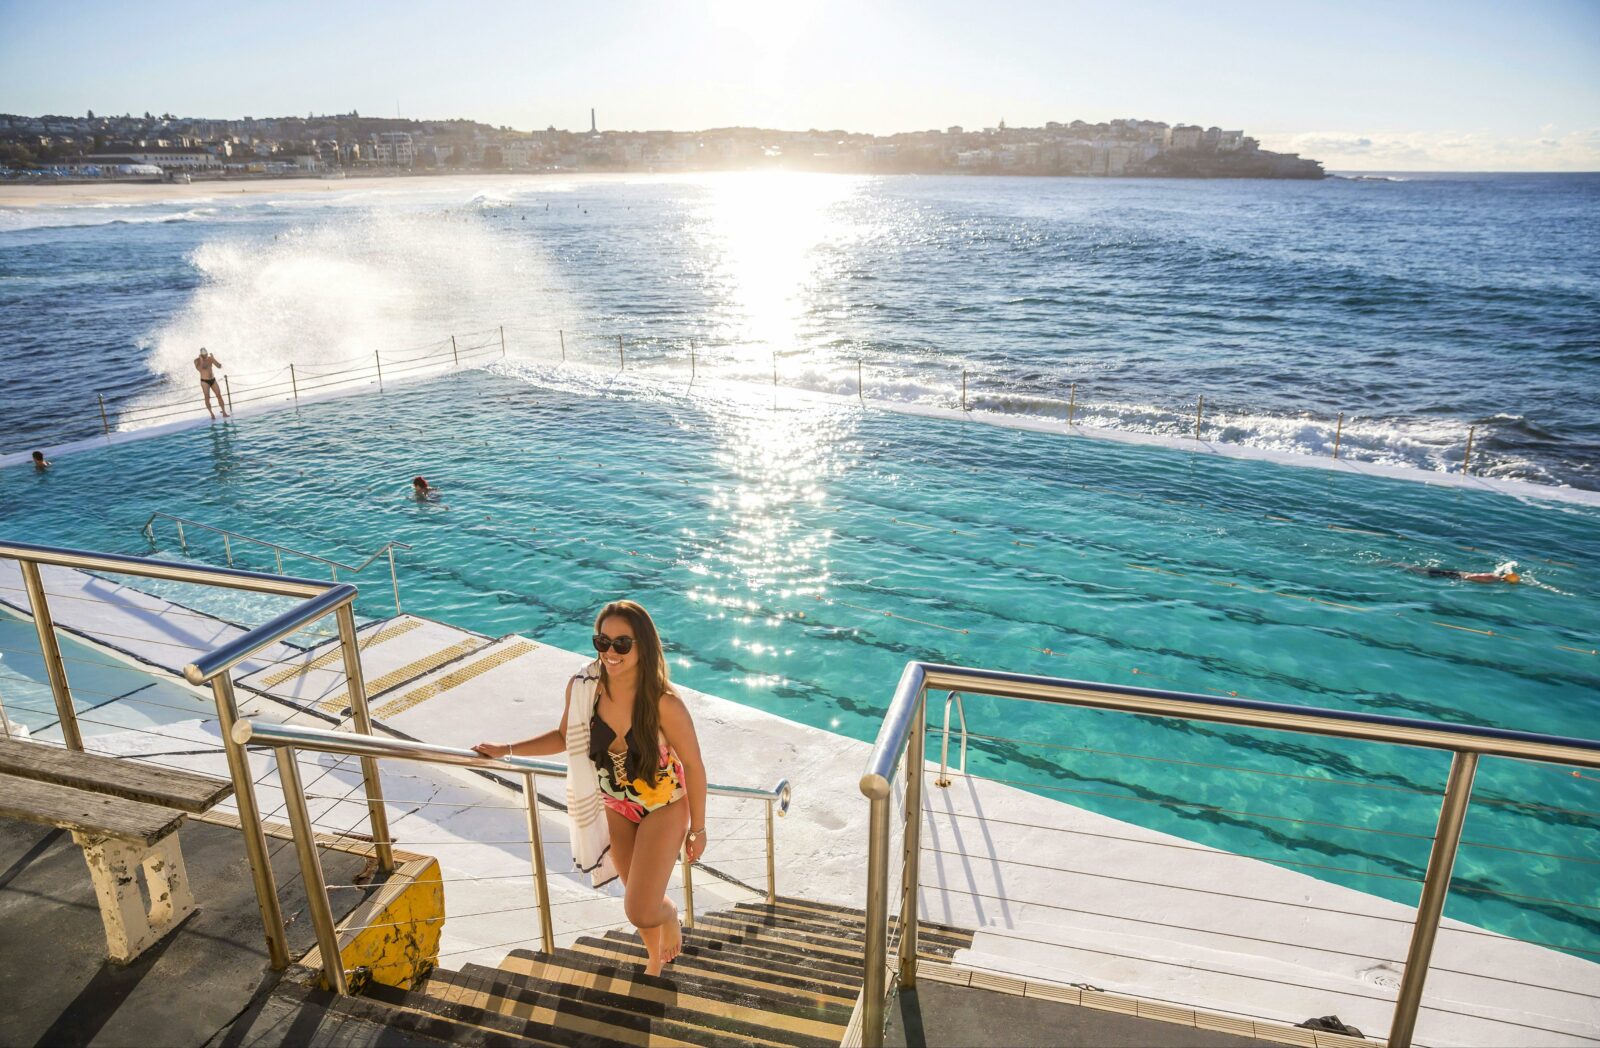 Early morning swimmers at Bondi Icebergs Club